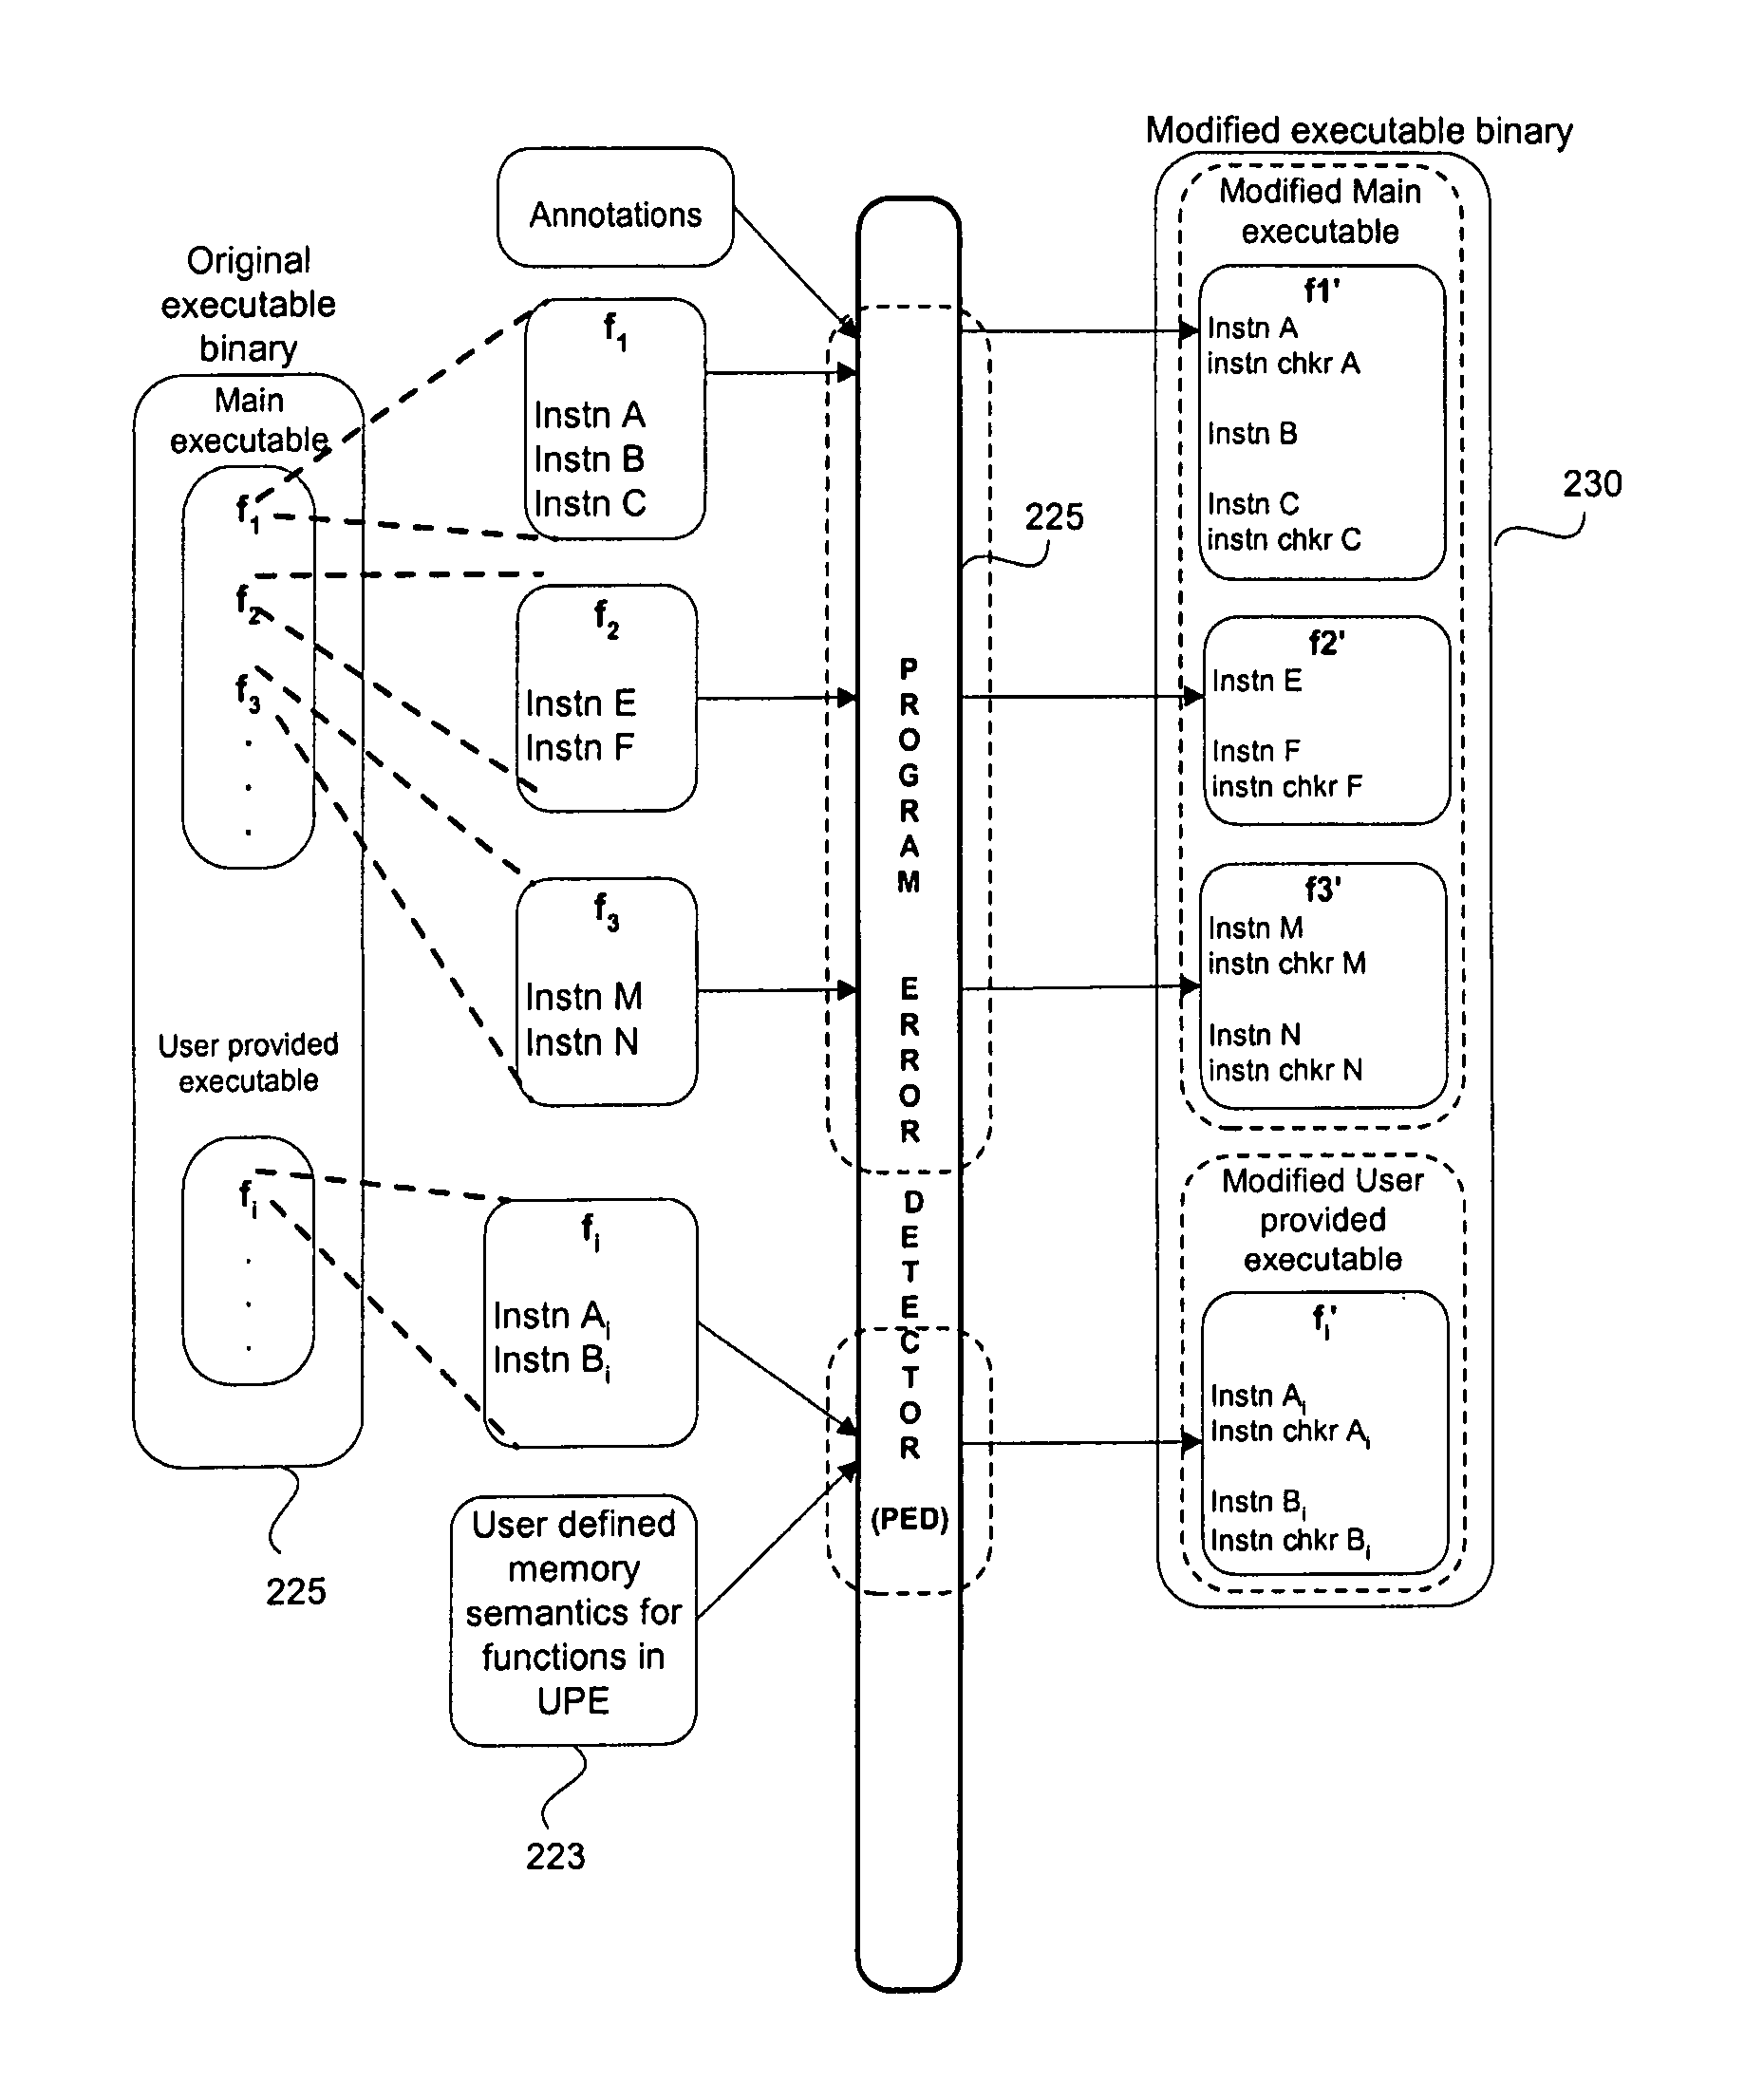 Method and system for detecting memory problems in user programs